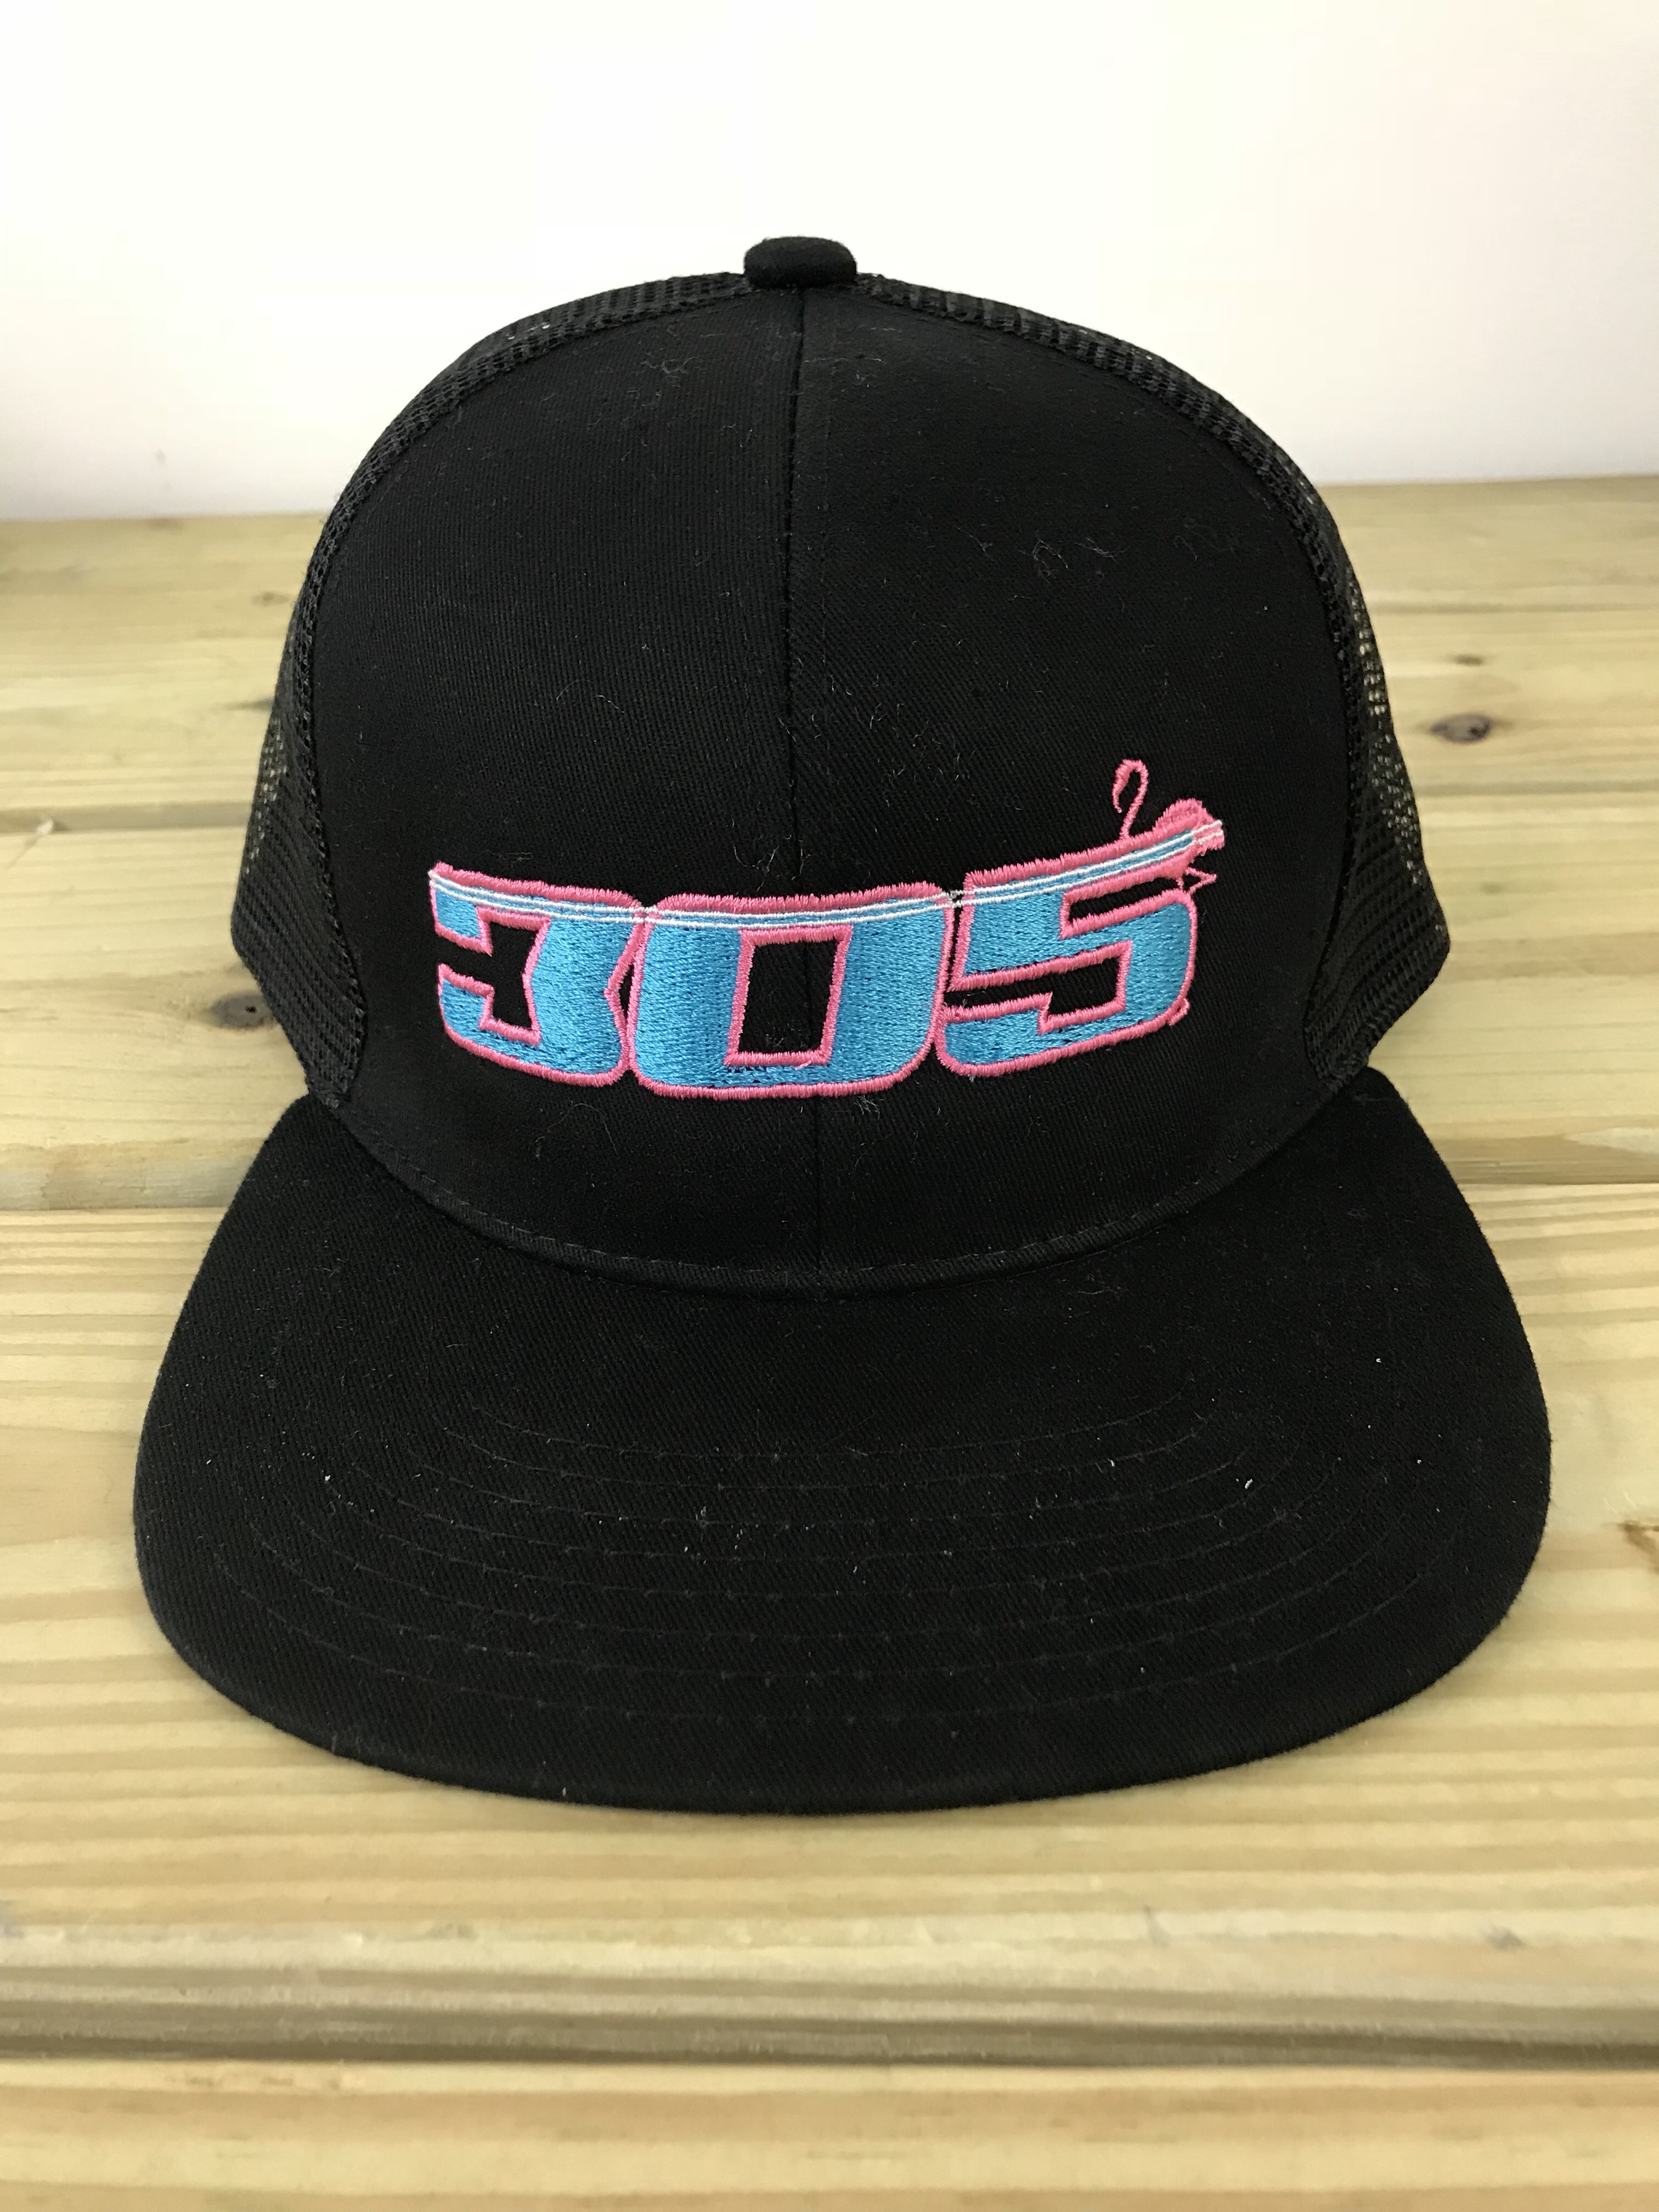 Miami Vice 305 Hat - Stares Group | T-Shirt Printing and Embroidery